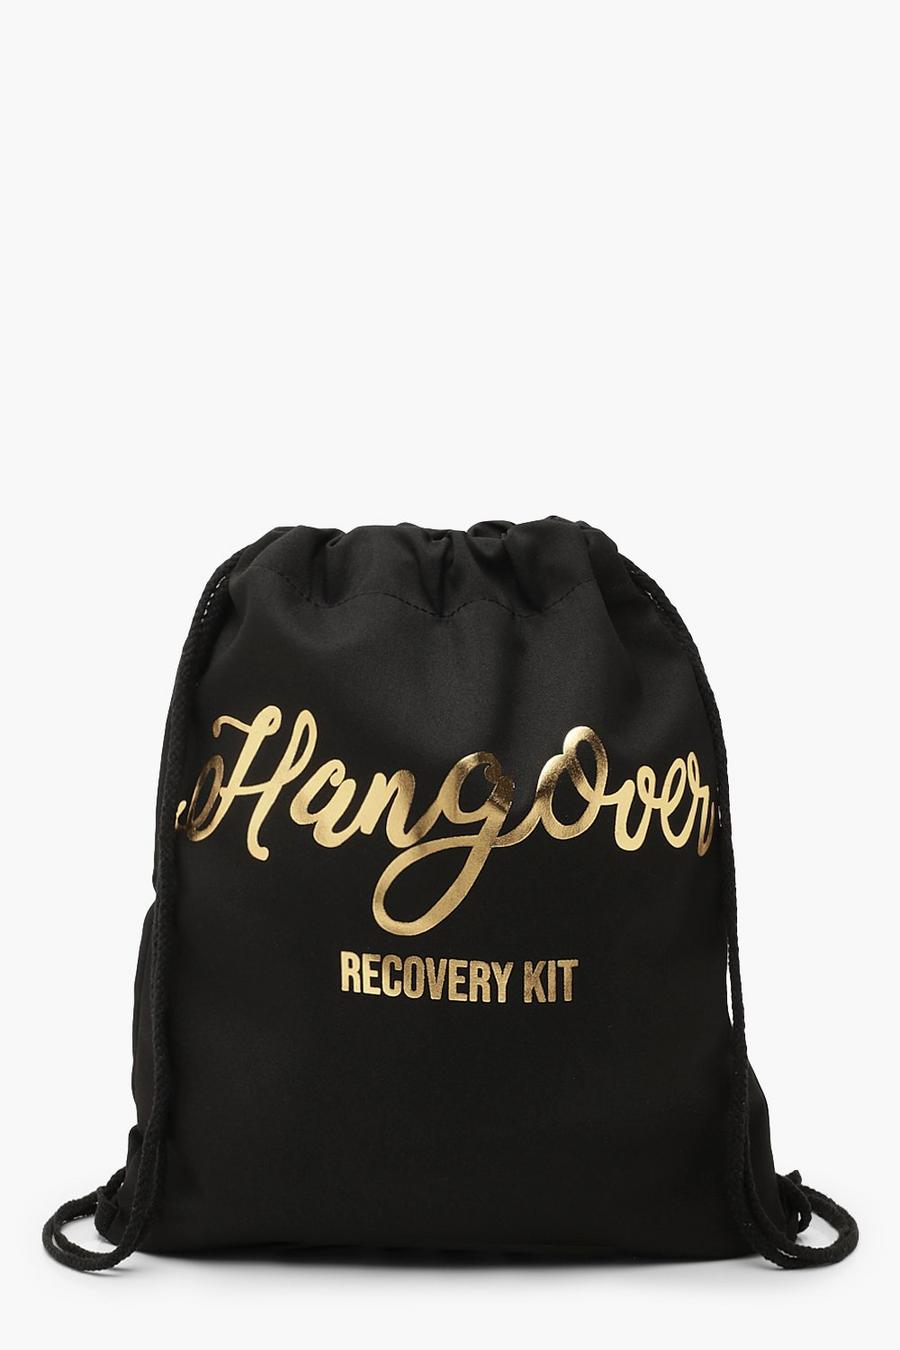 Foil Slogan Hangover Recovery Kit Drawcord Rucksack image number 1